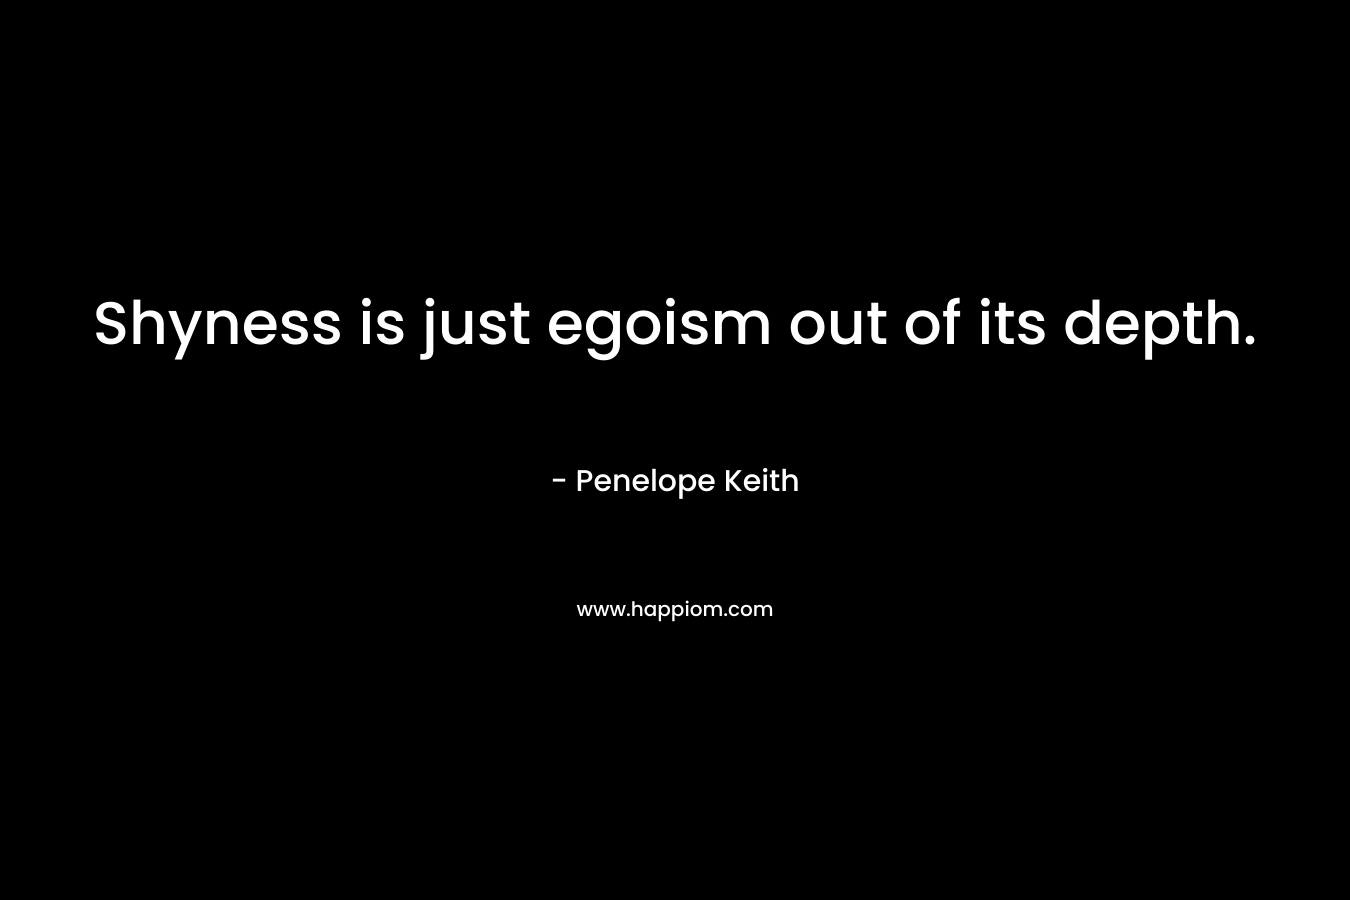 Shyness is just egoism out of its depth.